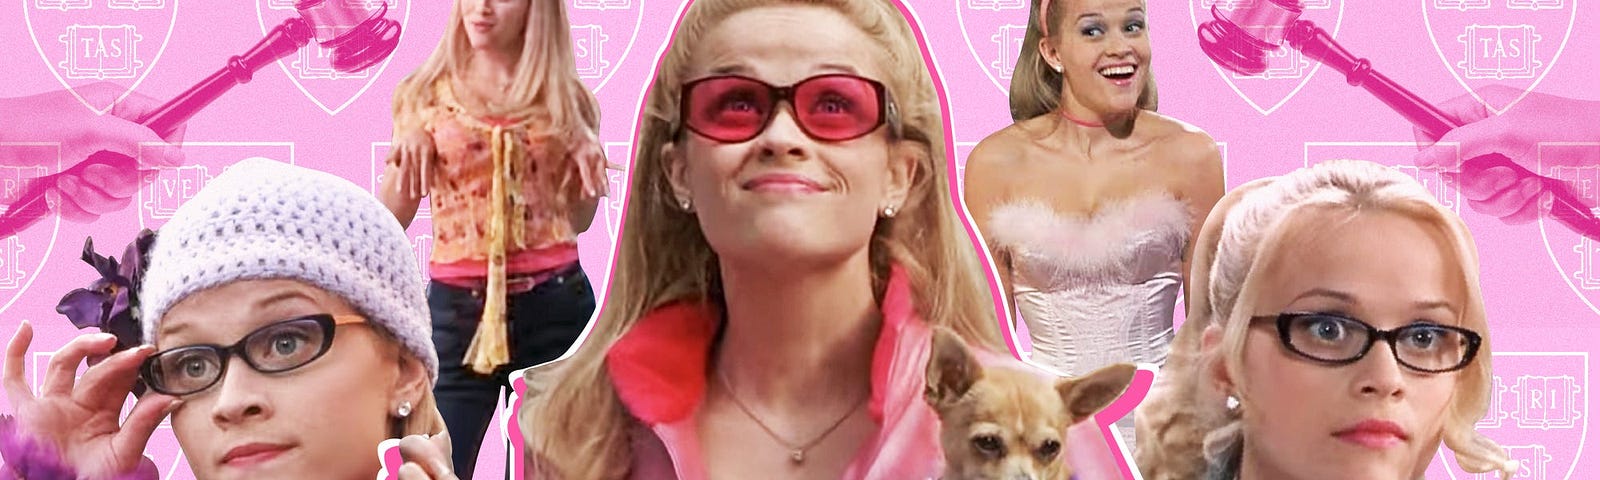 Reese Witherspoon in “Legally Blonde.”